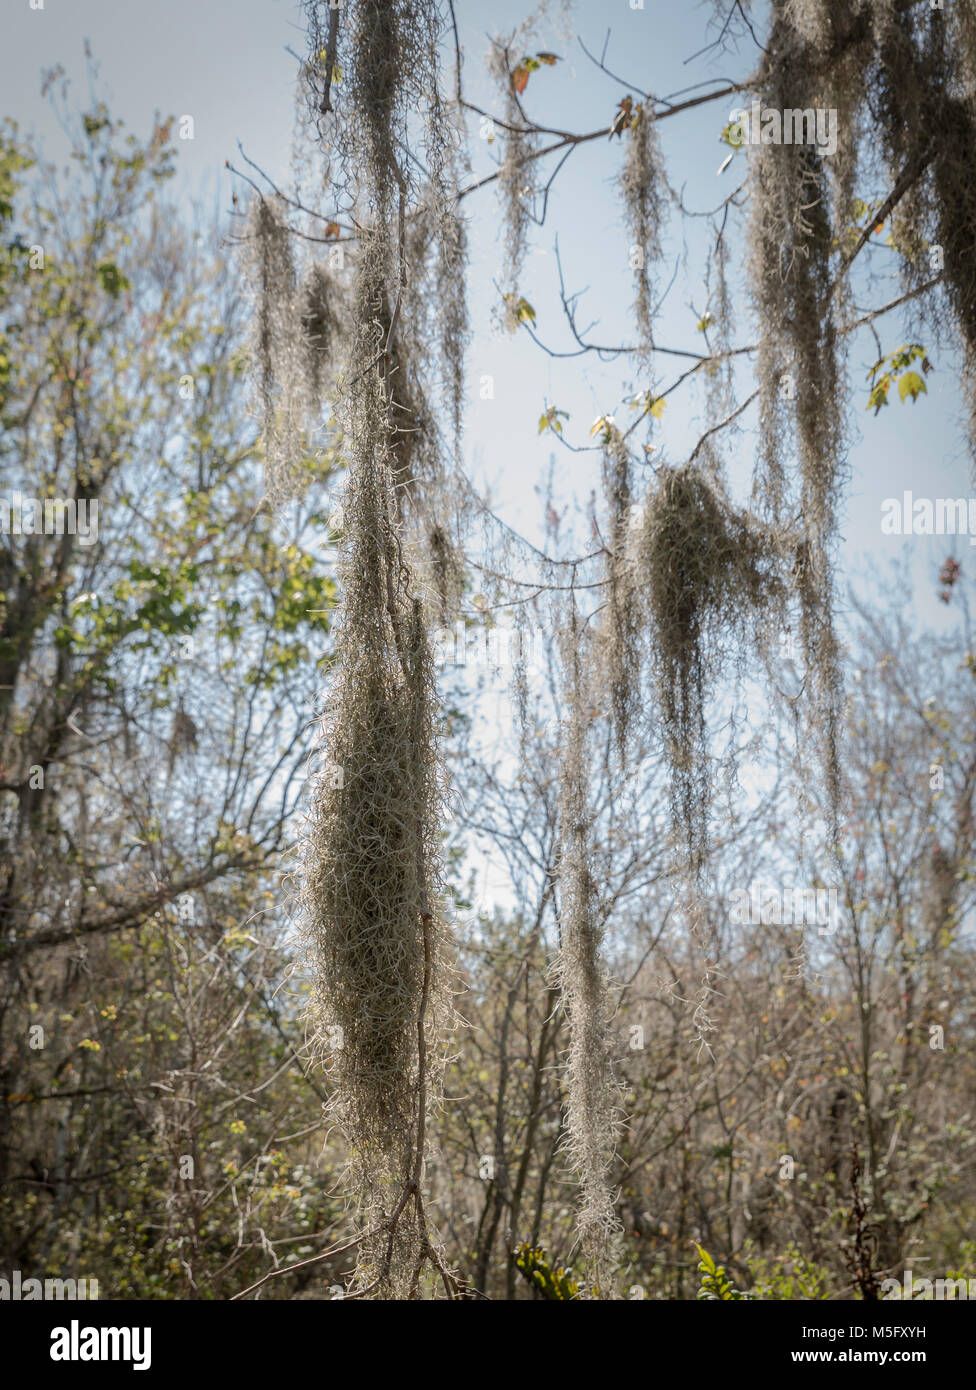 Clumps of Spanish moss hanging from tree branches Stock Photo